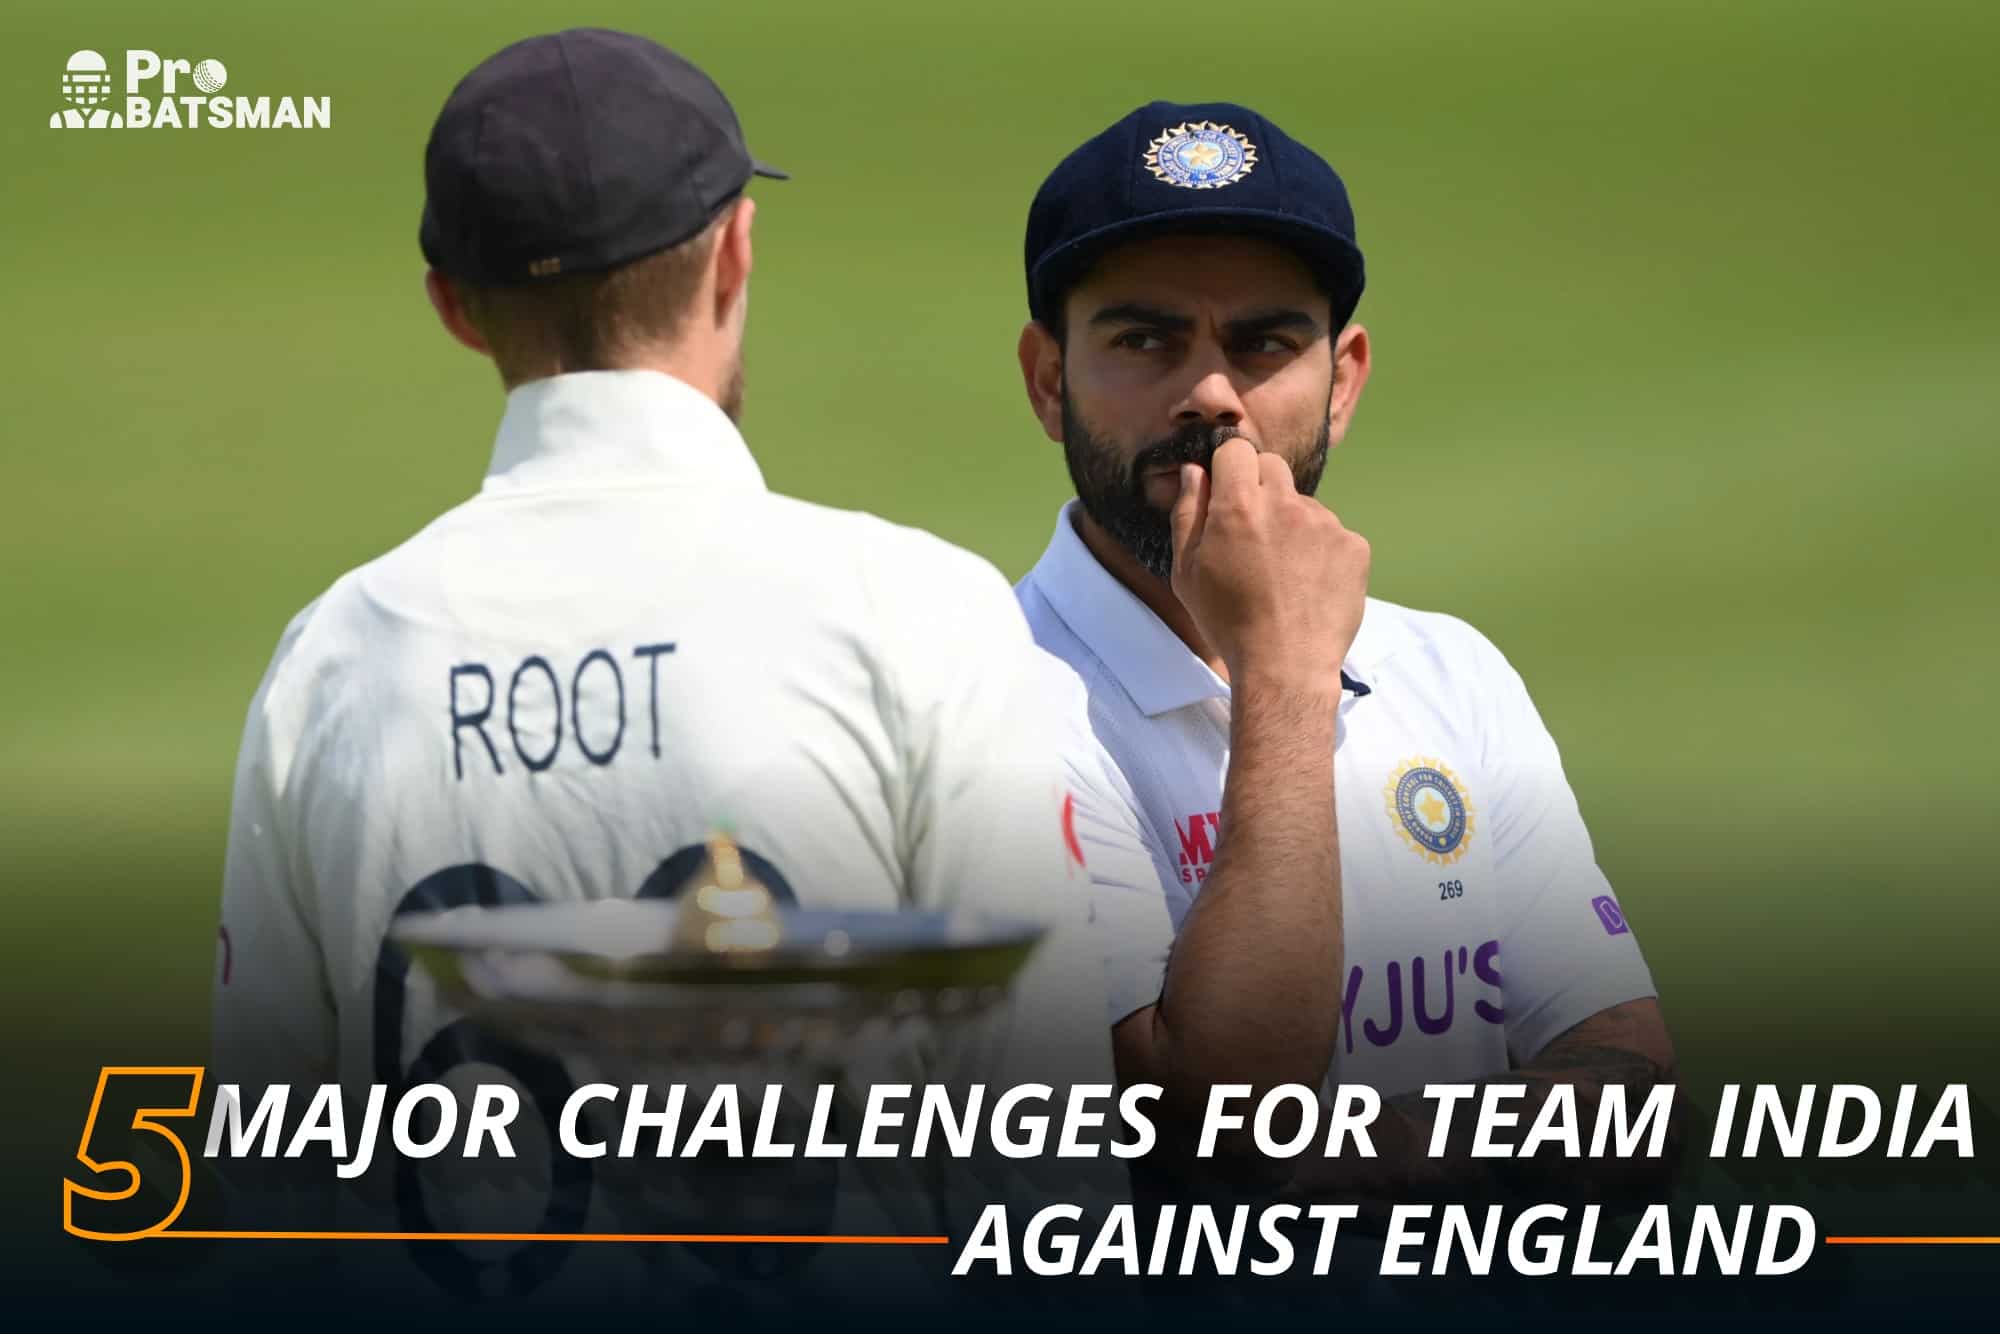 5 Major Challenges For Team India Ahead of 5-Match Test Series Against England